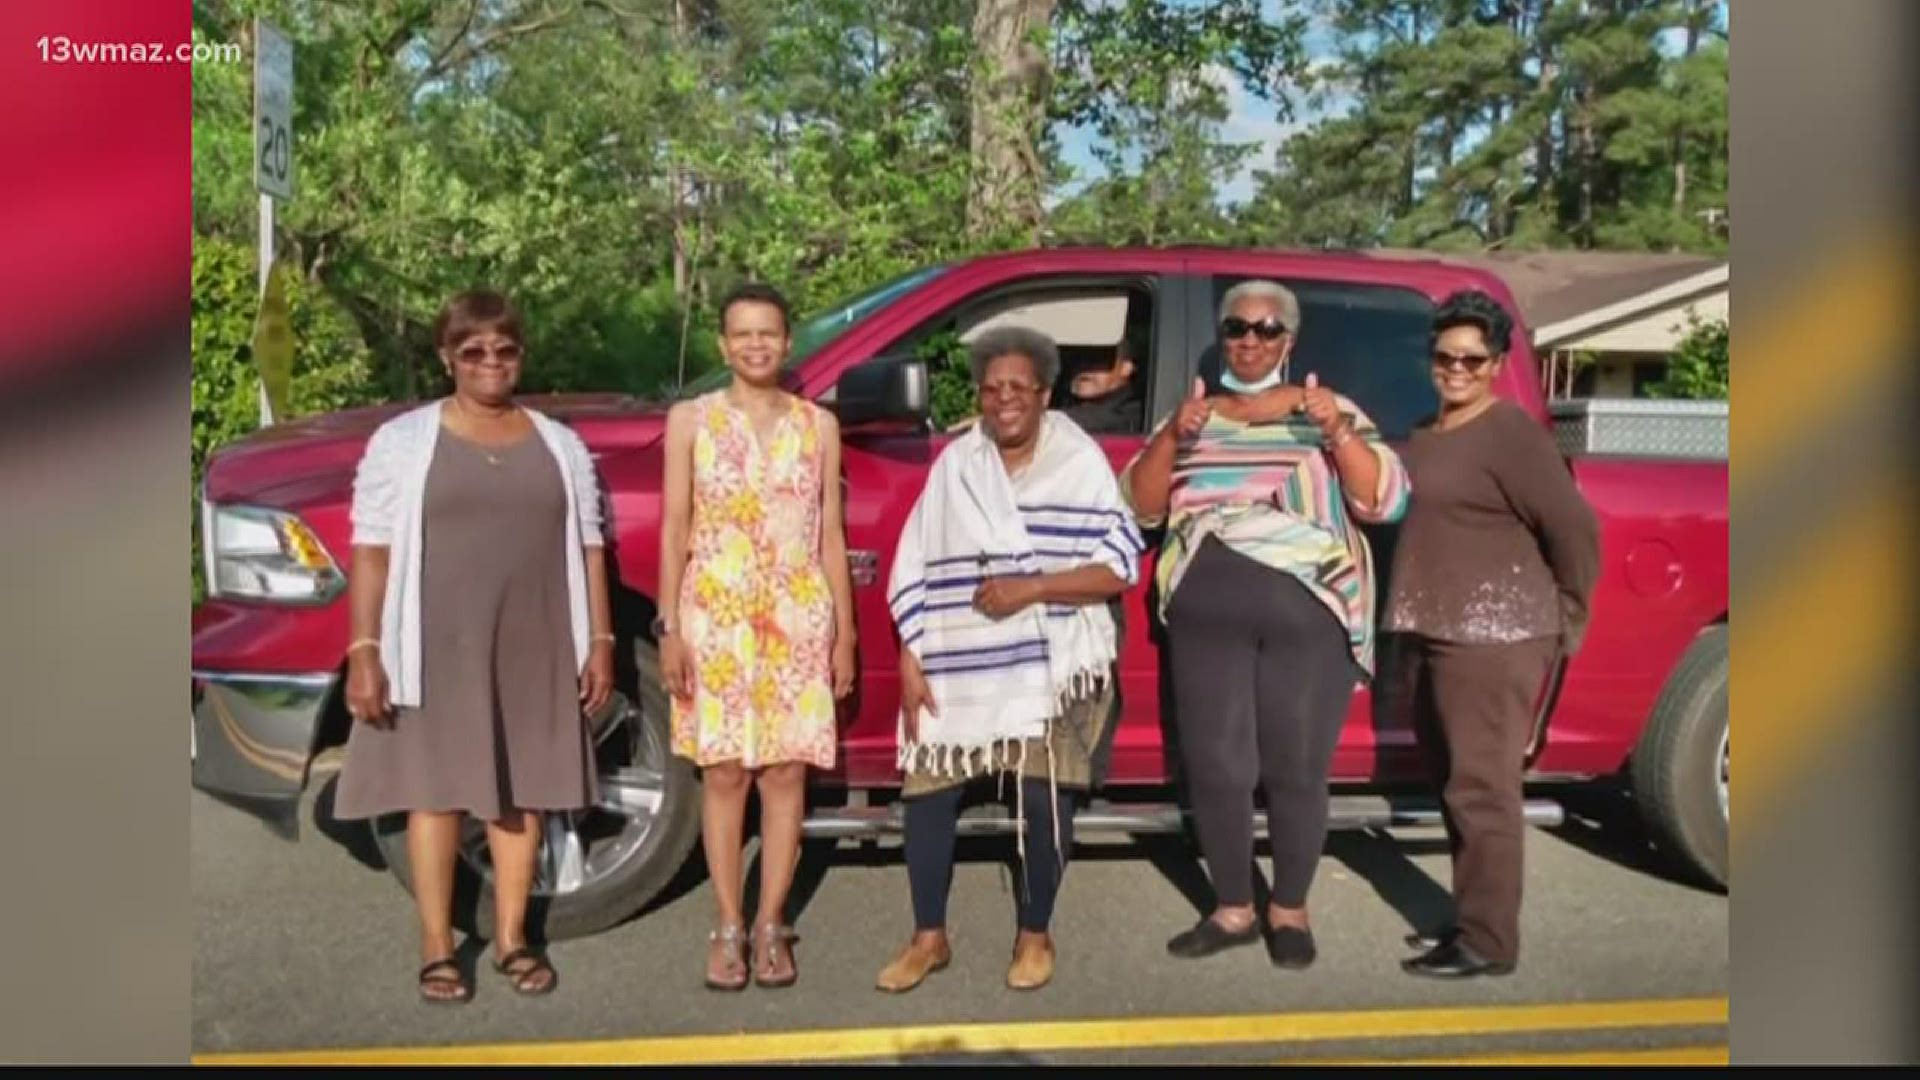 Wailing Women on Wheels does weekly drive-by prayers through communities in Washington County to help lift spirits during the COVID-19 pandemic.